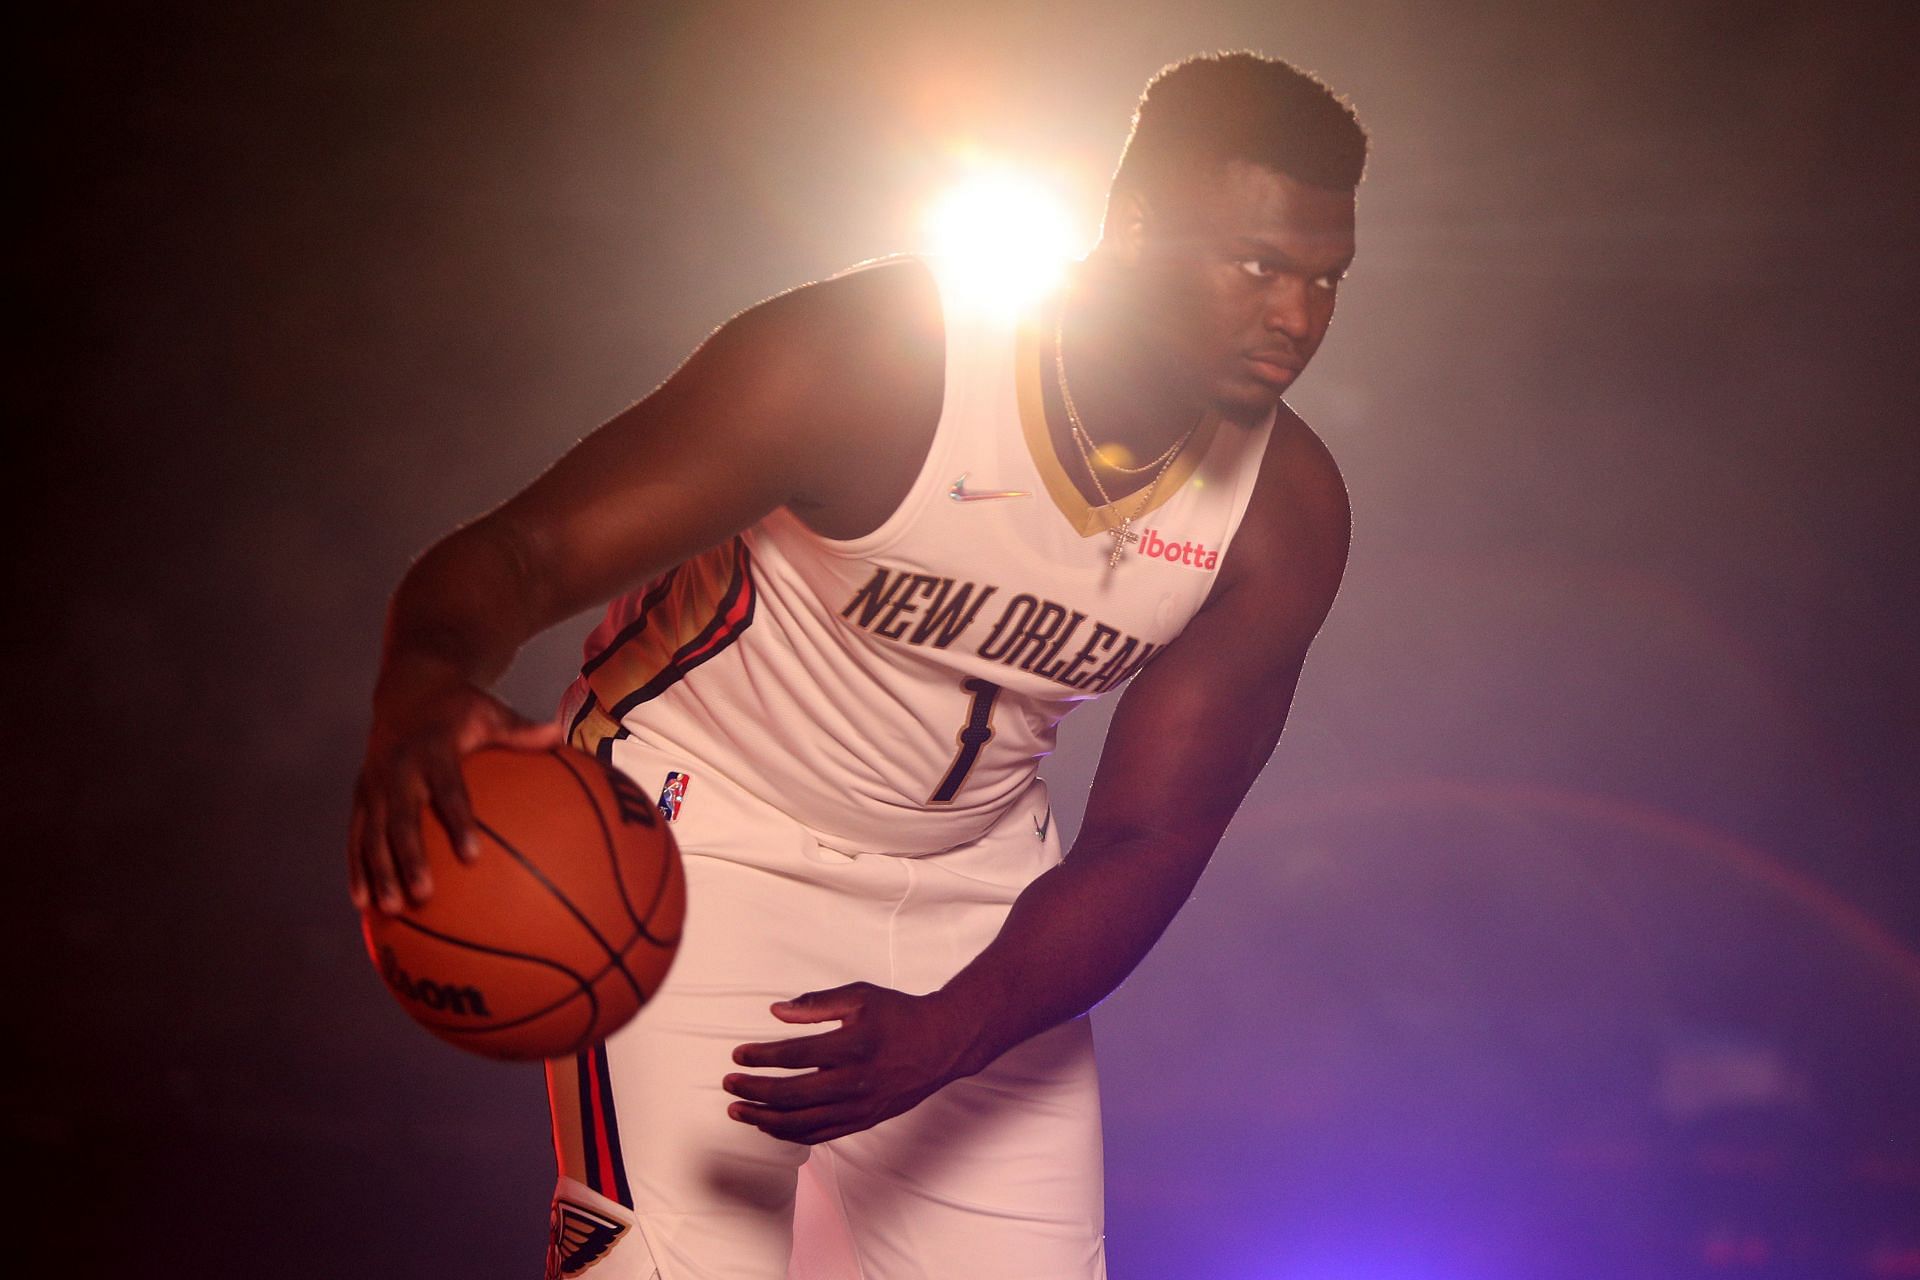 Zion Williamson #1 of the New Orleans Pelicans poses for photos during Media Day at Smoothie King Center on September 27, 2021 in New Orleans, Louisiana.